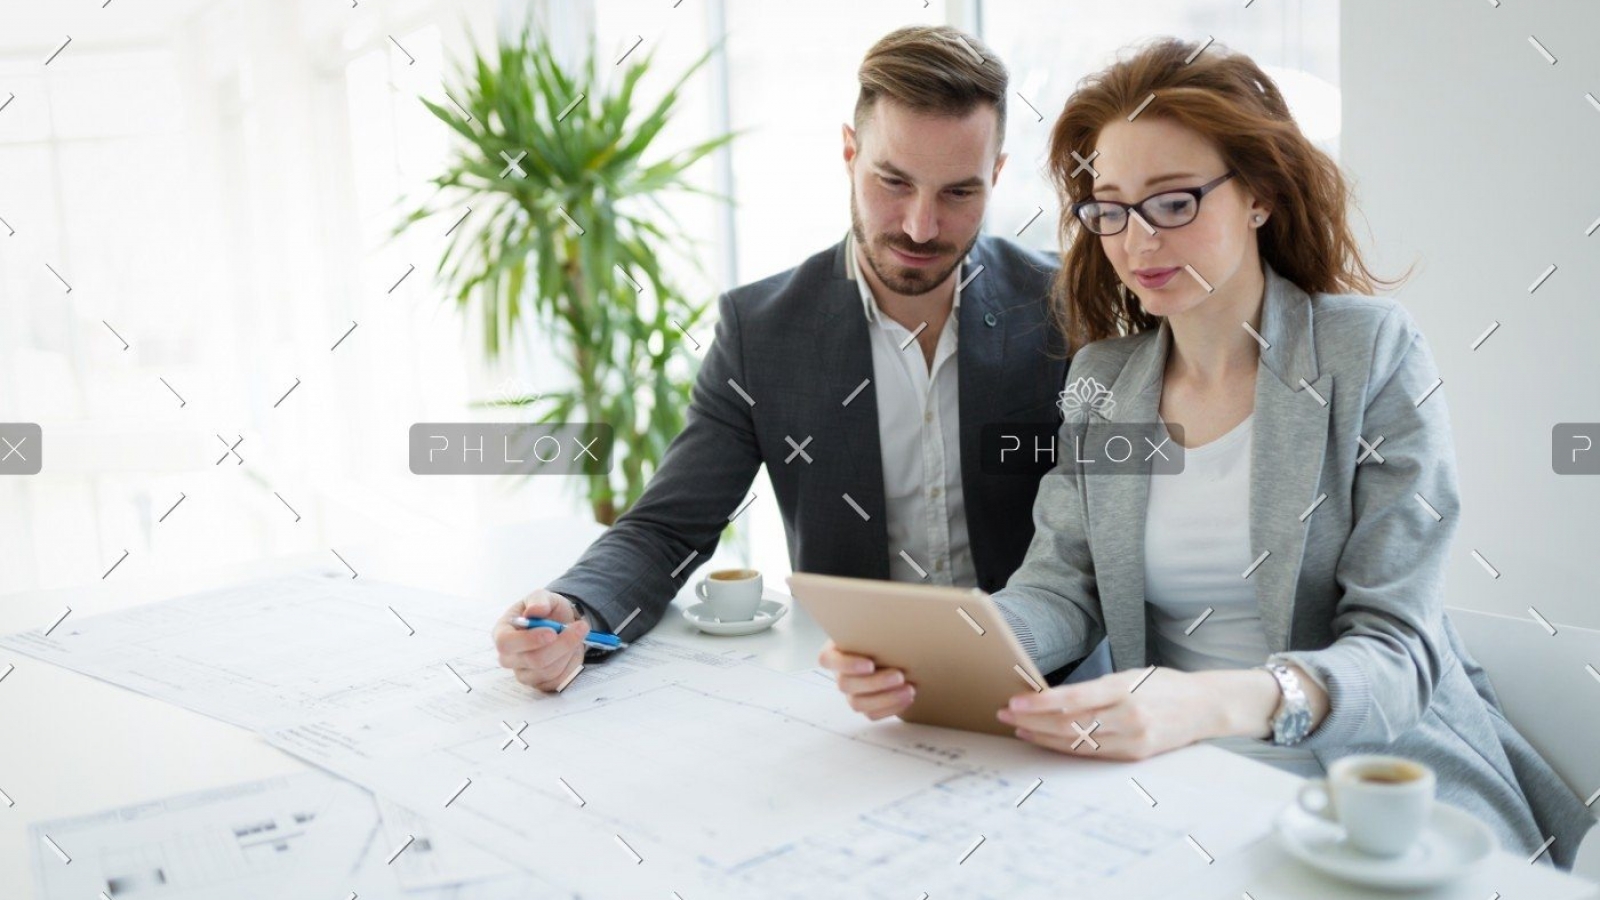 demo-attachment-337-portrait-of-young-architect-woman-on-meeting-KFZCE3A